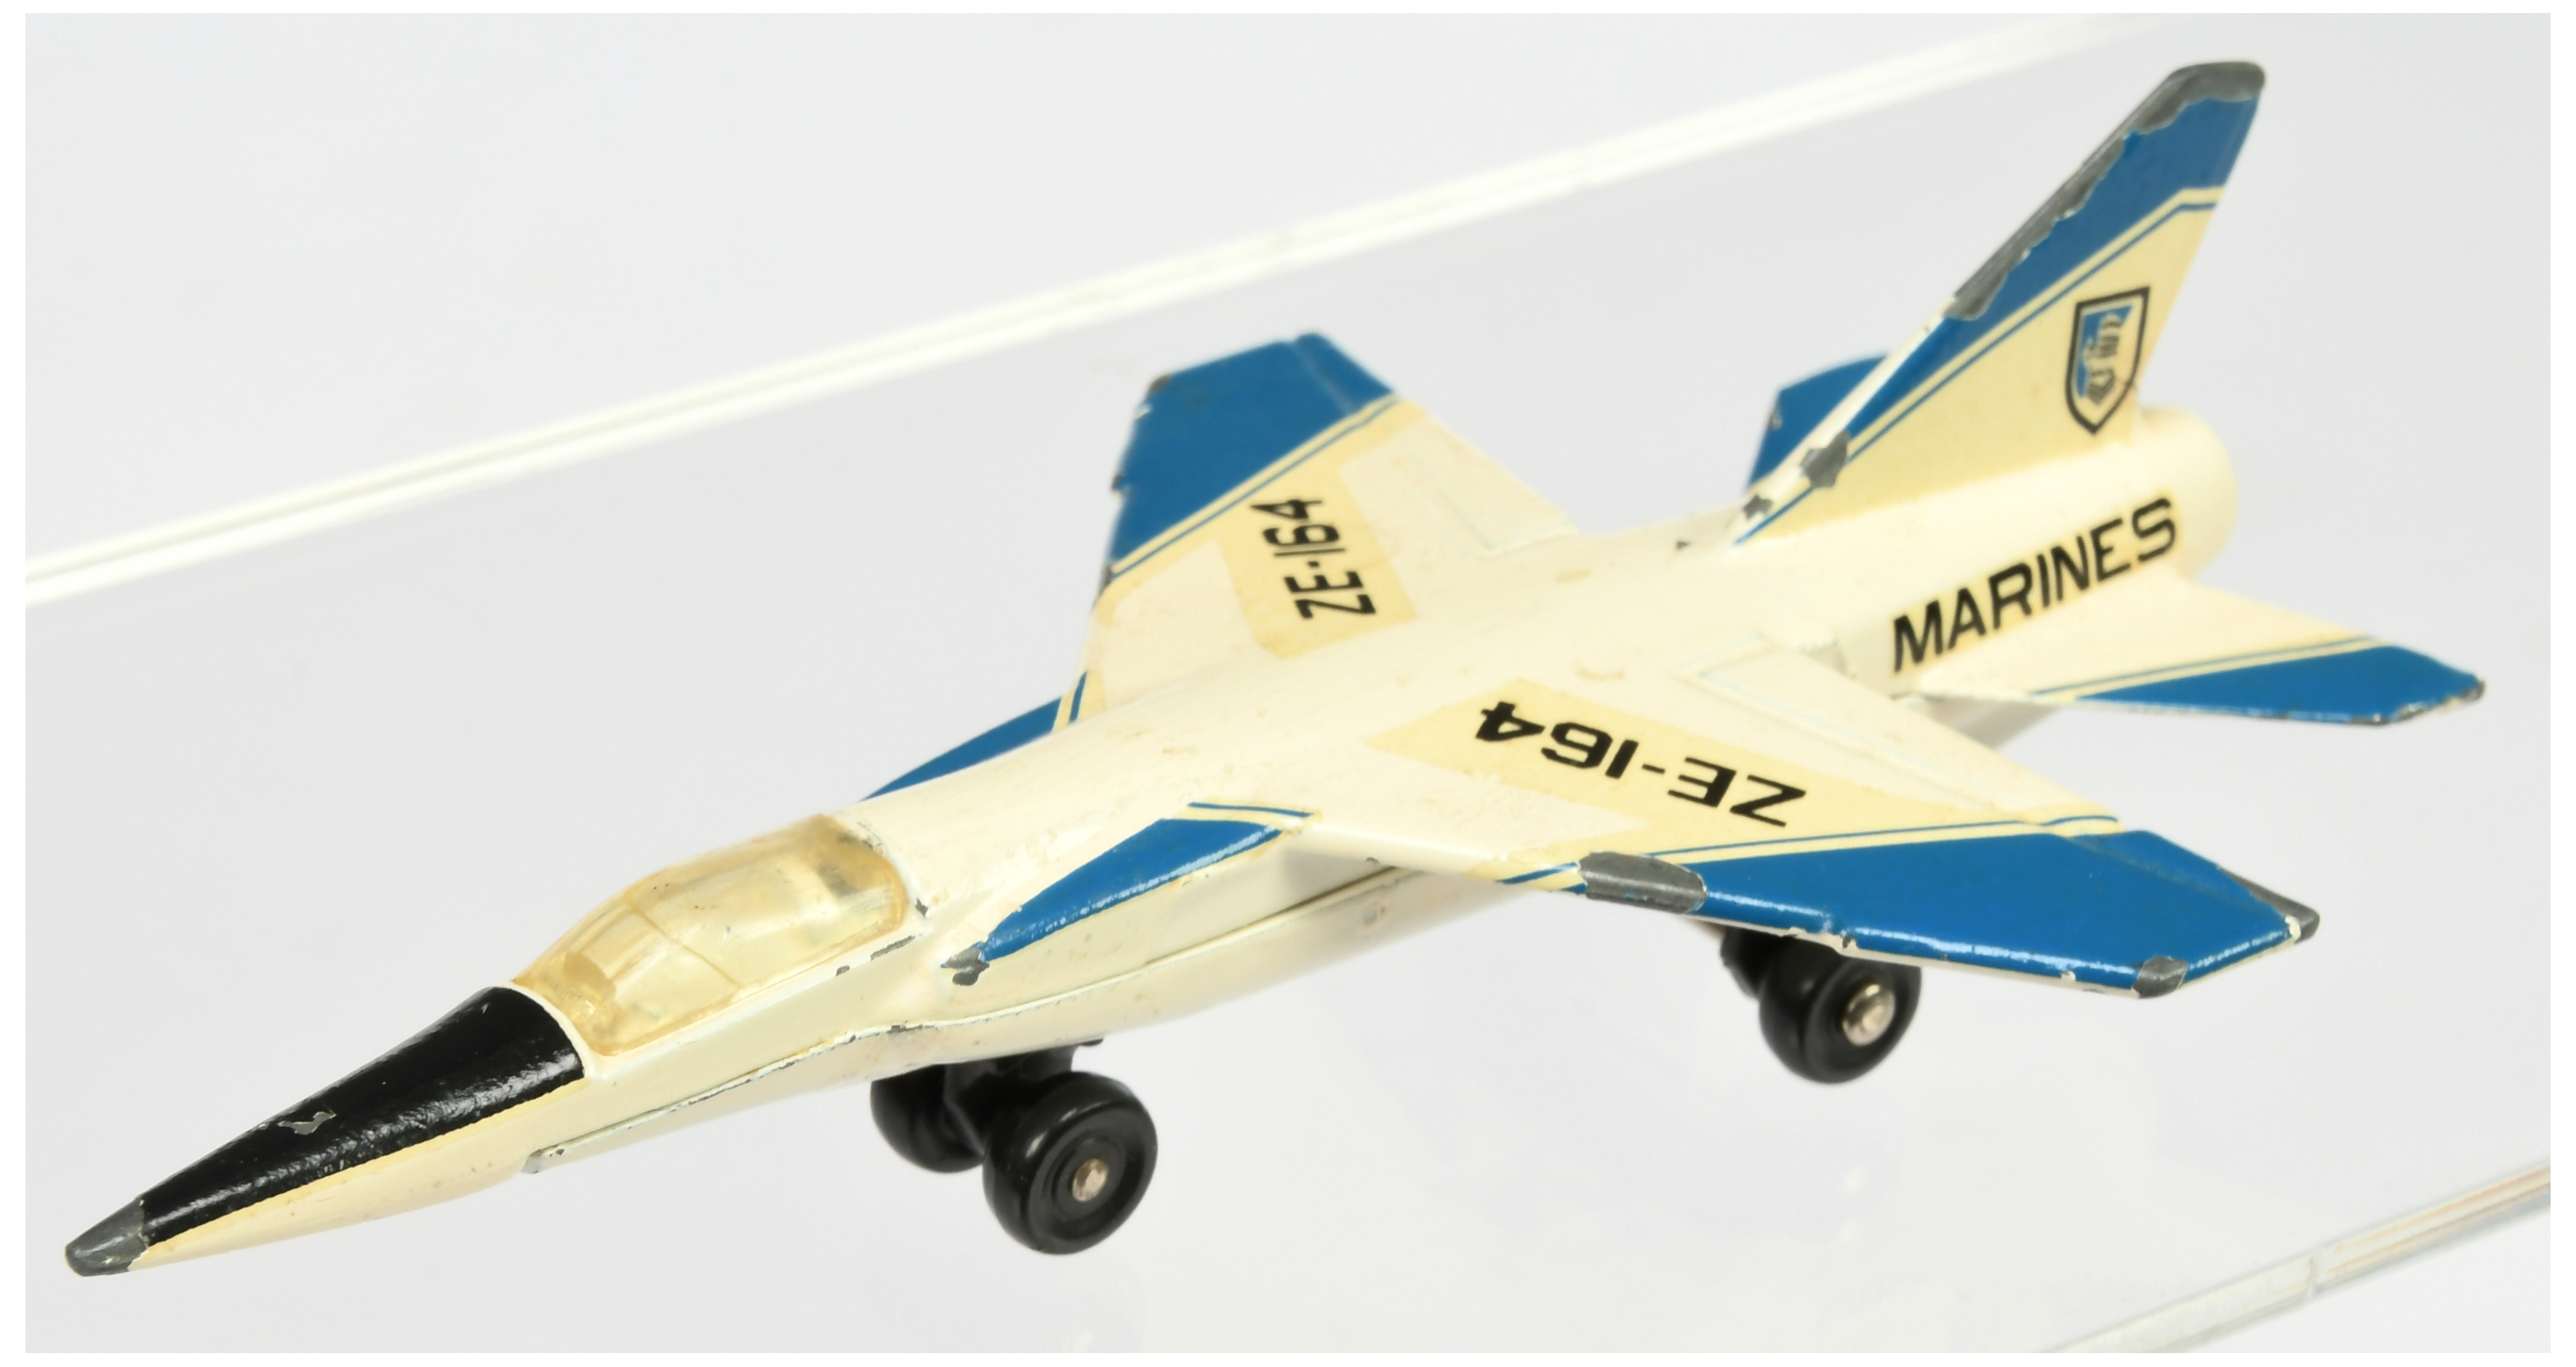 Matchbox Skybusters SB4 Mirage F1 Pre-production Trial model - white fuselage with blue stripes, ...